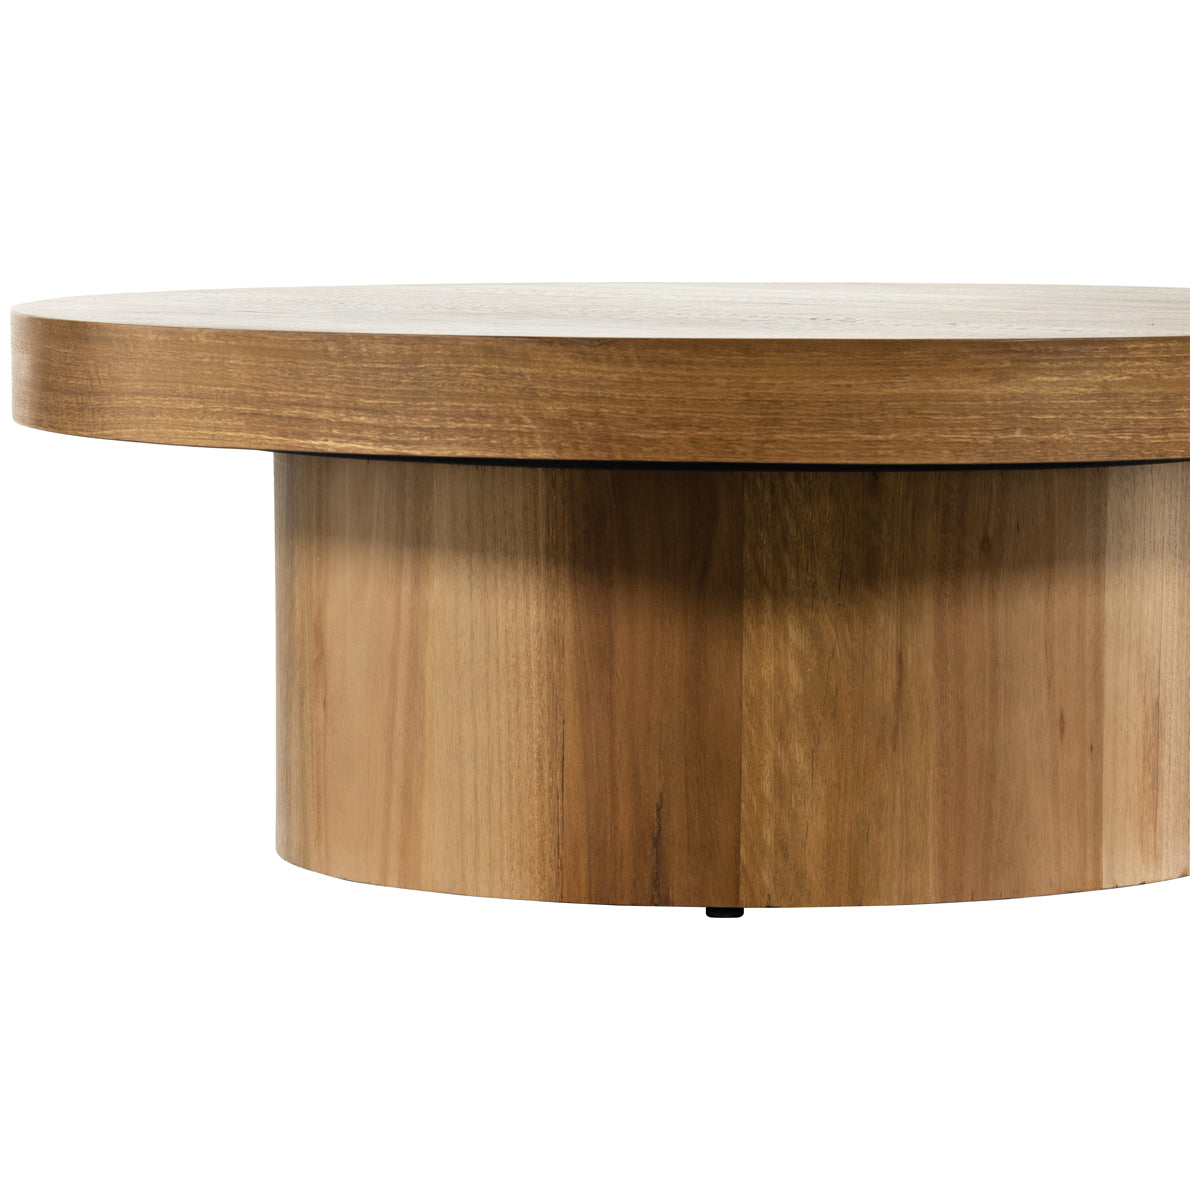 Four Hands Wesson Hudson Pedestal Coffee Table - Natural Yukas